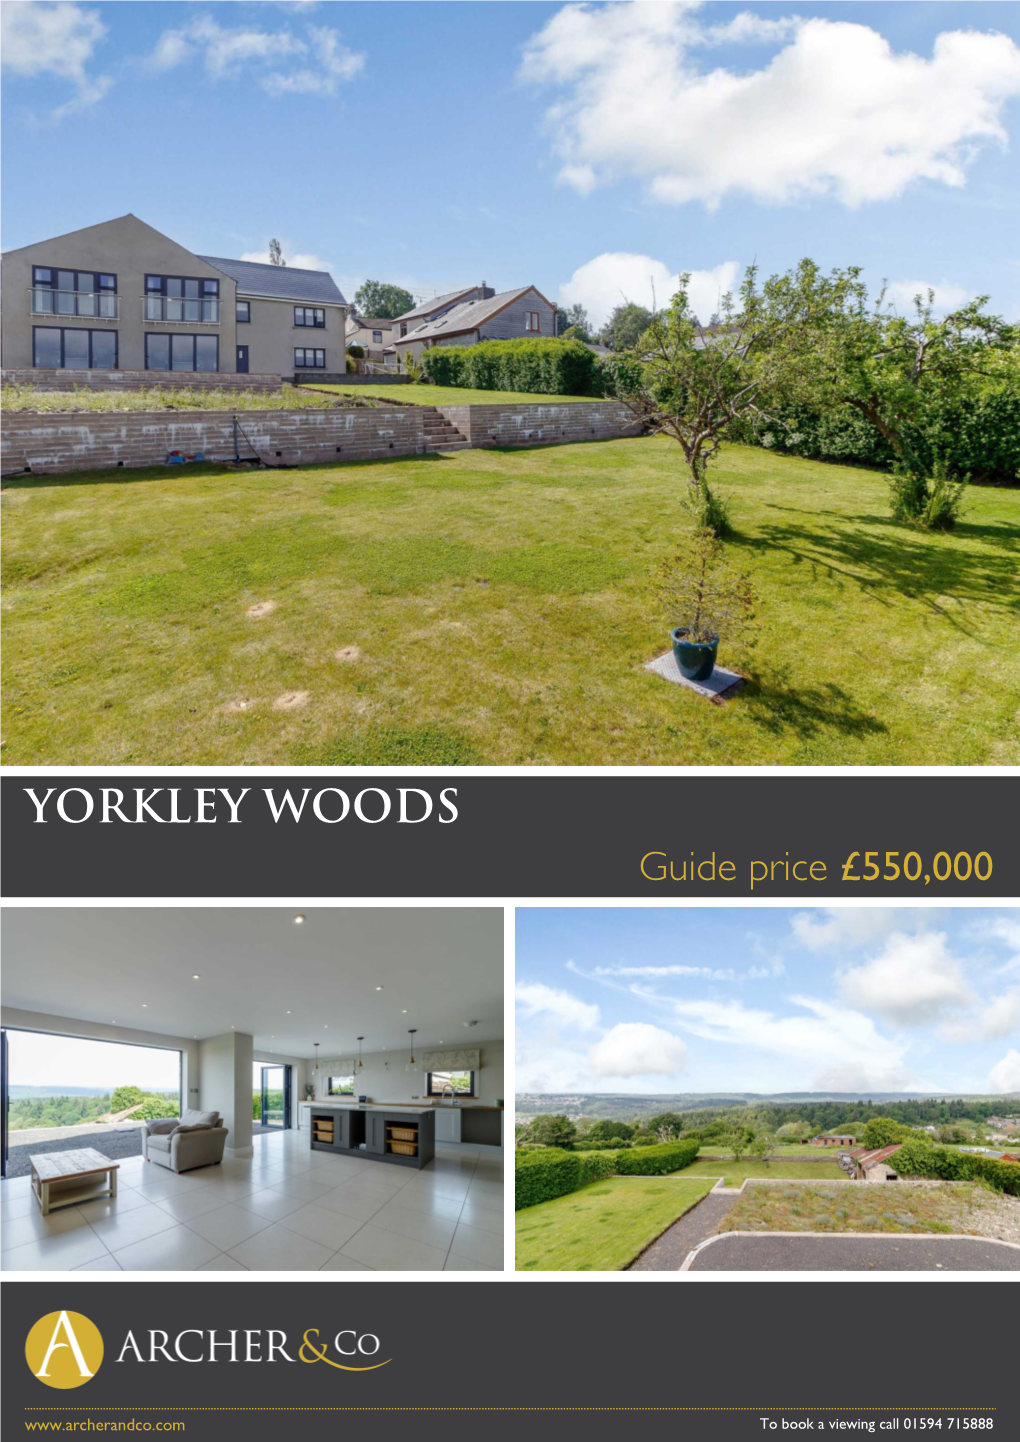 YORKLEY WOODS Guide Price £550,000